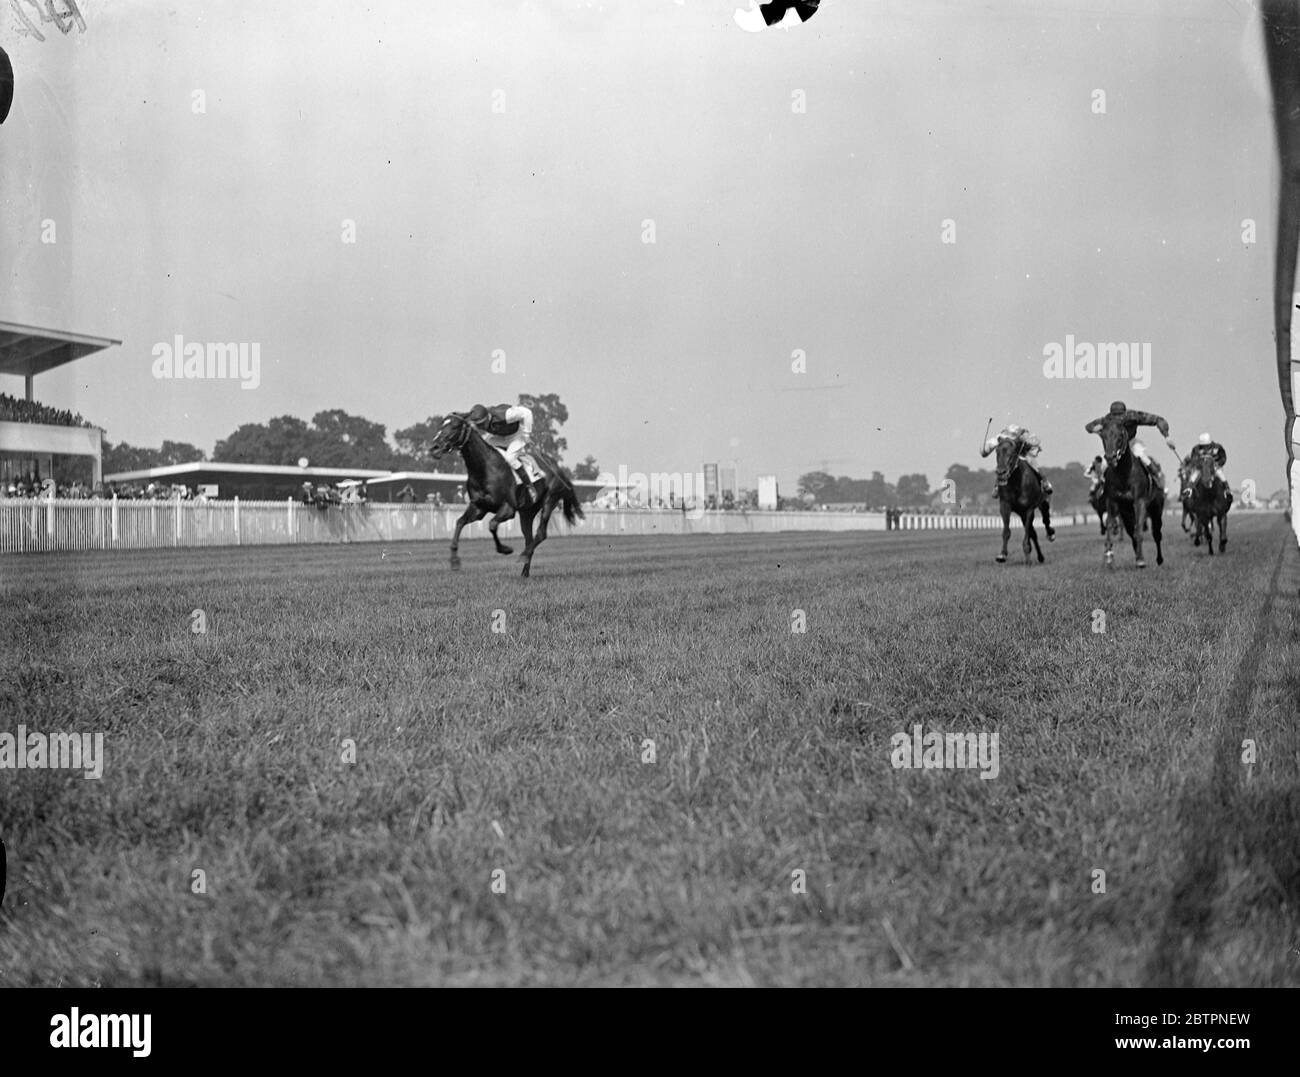 Northolt Derby 'Hat Trick '. Short Ration one Northolt Derby at Northolt gaining for Pat Donoghue, the trainer his third successive win in the Northolt Derby. Short Ration is owned by Miss Chester Beatty. Photo shows, short Ration winning the Northolt Derby. 14 June 1937 Stock Photo